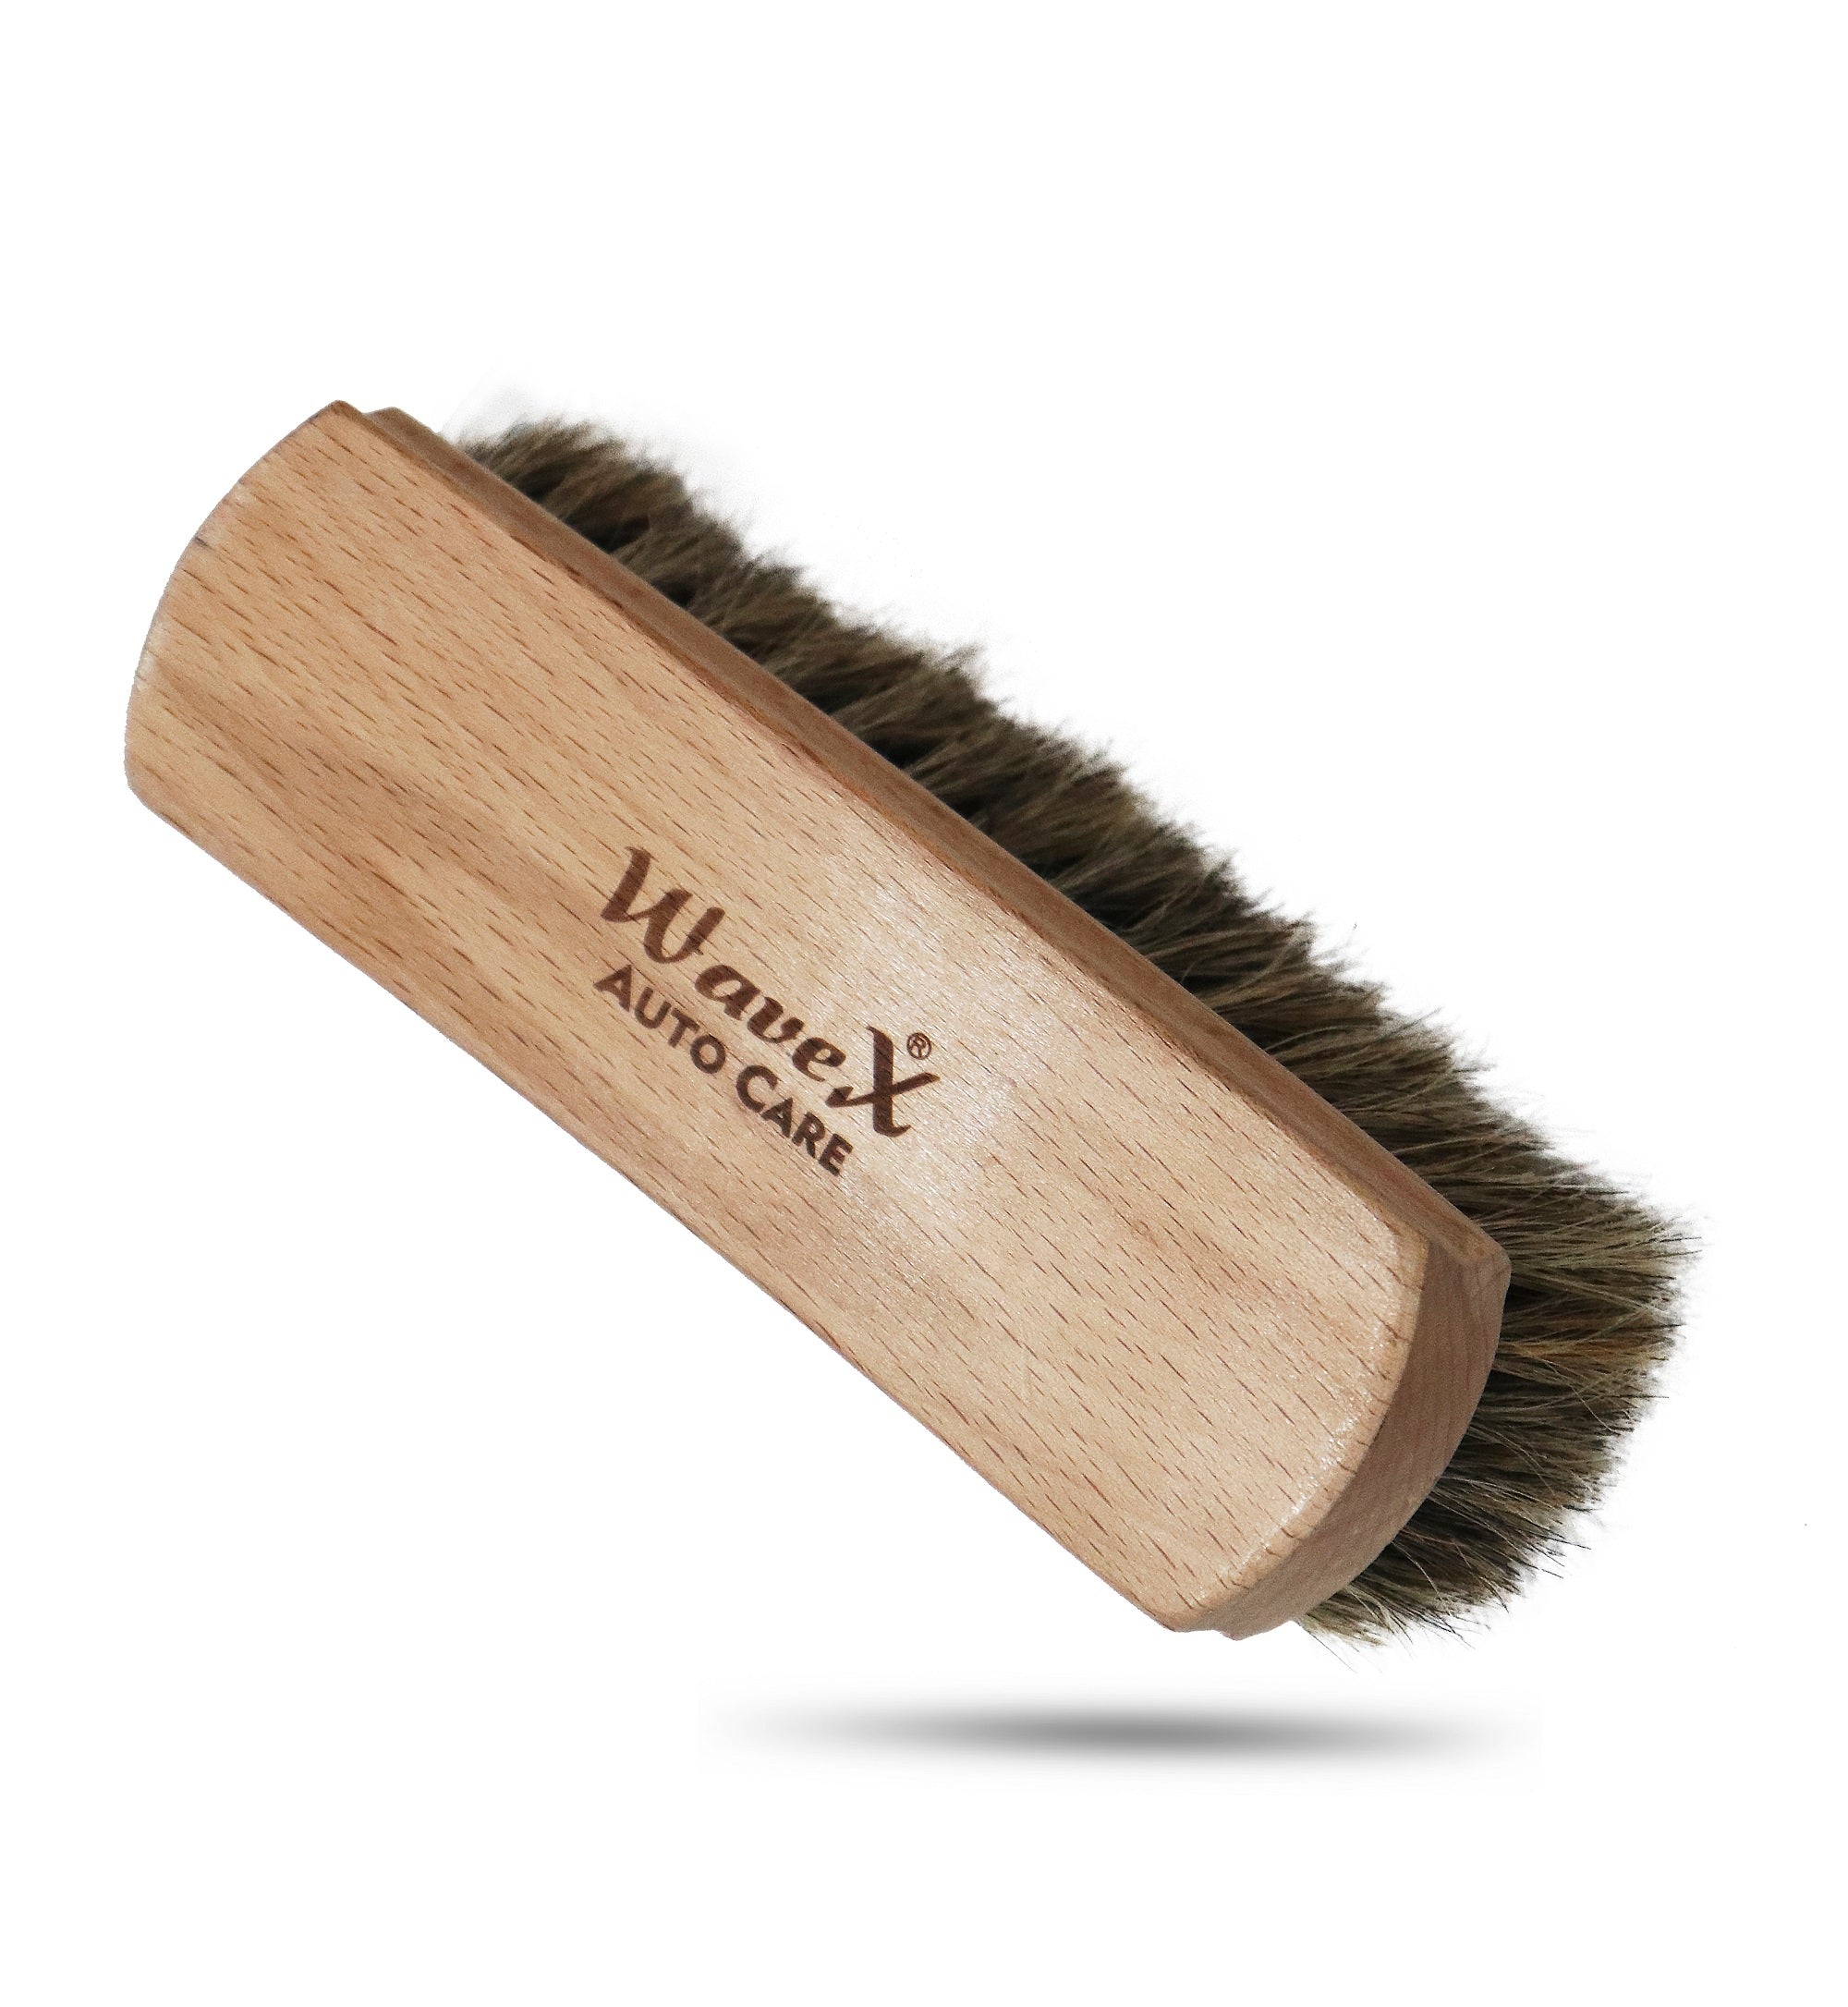 WaveX Premium Car Dashboard, Leather and Interior Detailing Brush | Long Bristle Natural Horse Hair Beach Wood Cleaning And Detailing Brush | For Plastic, Leather, Vinyl, Rubber, Upholstery And Much More.